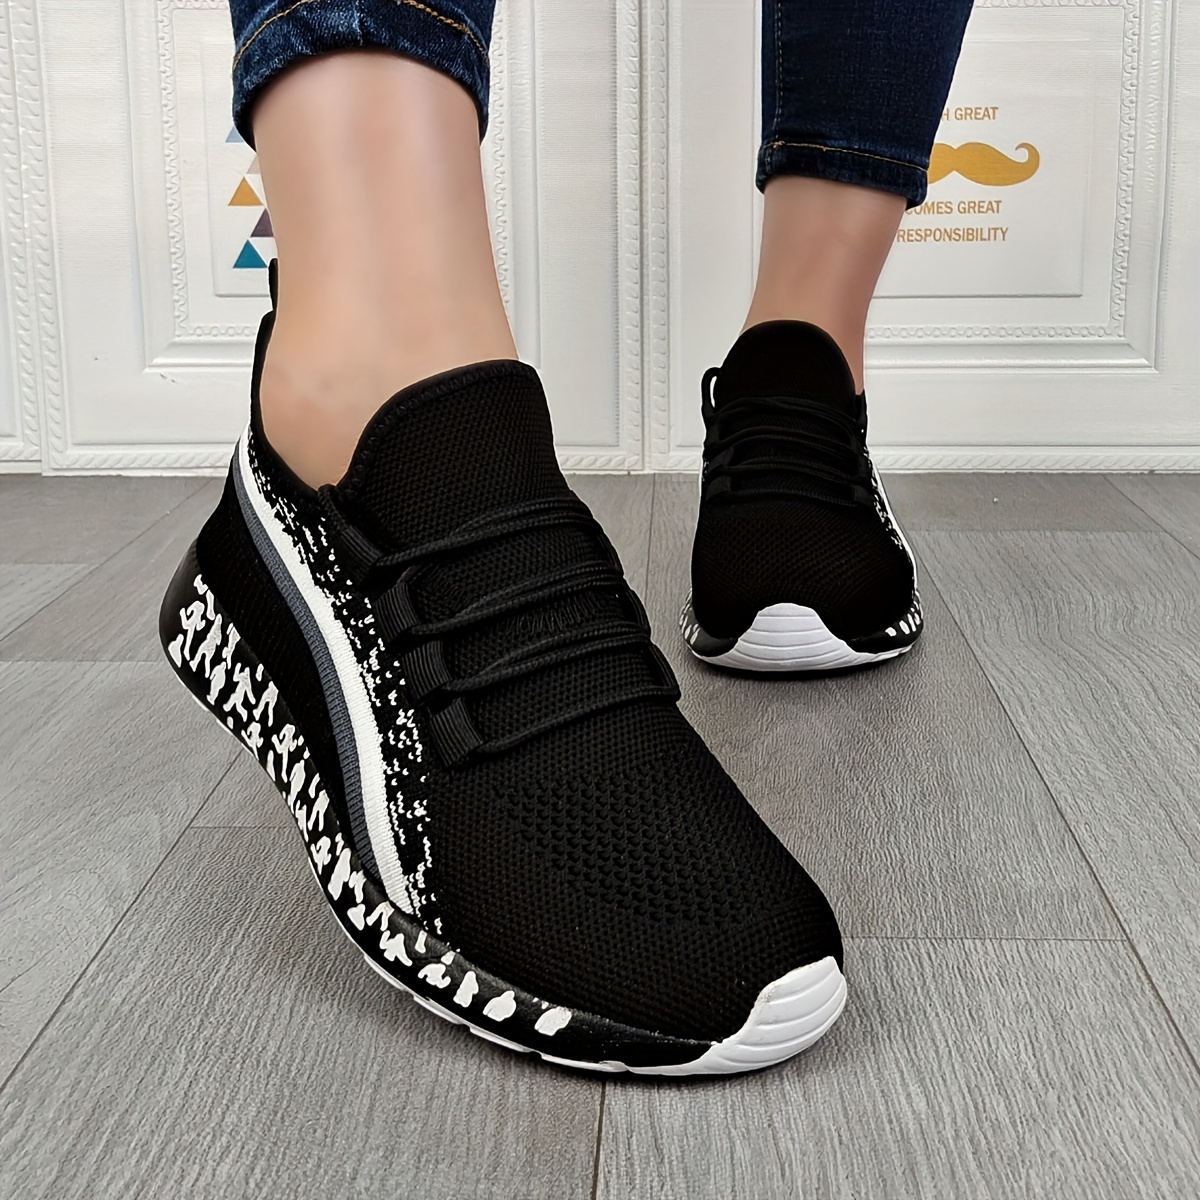 

Women's Summer Sneakers, Breathable, Comfortable, Lightweight Non-slip Lace-up Shoes, Random Printed Sole Casual Running Shoes